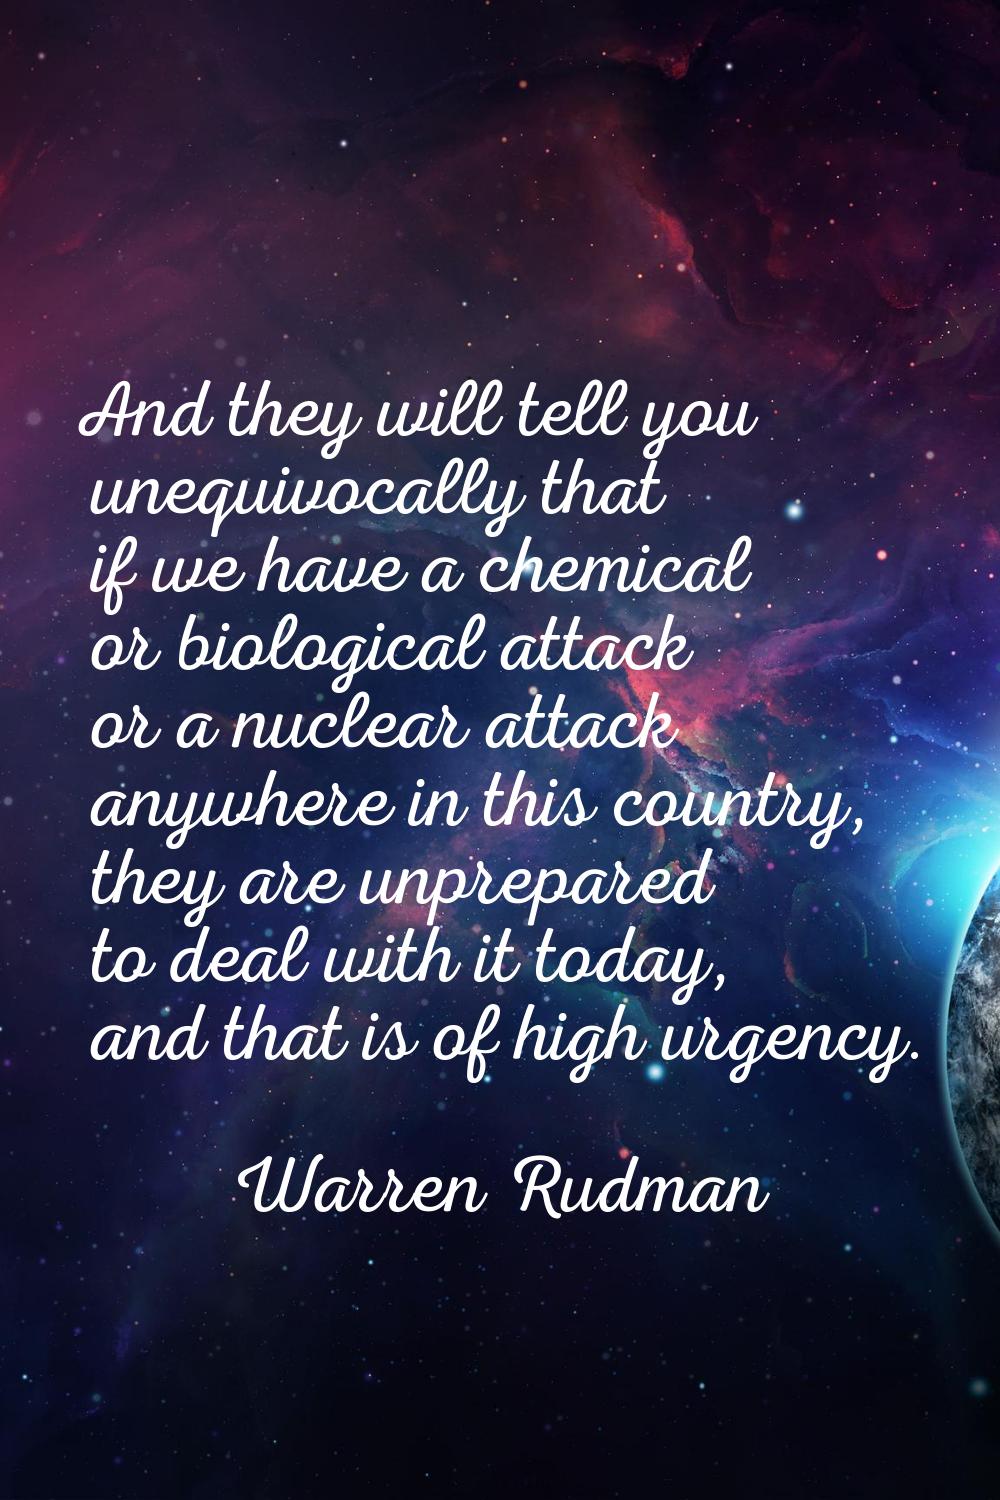 And they will tell you unequivocally that if we have a chemical or biological attack or a nuclear a